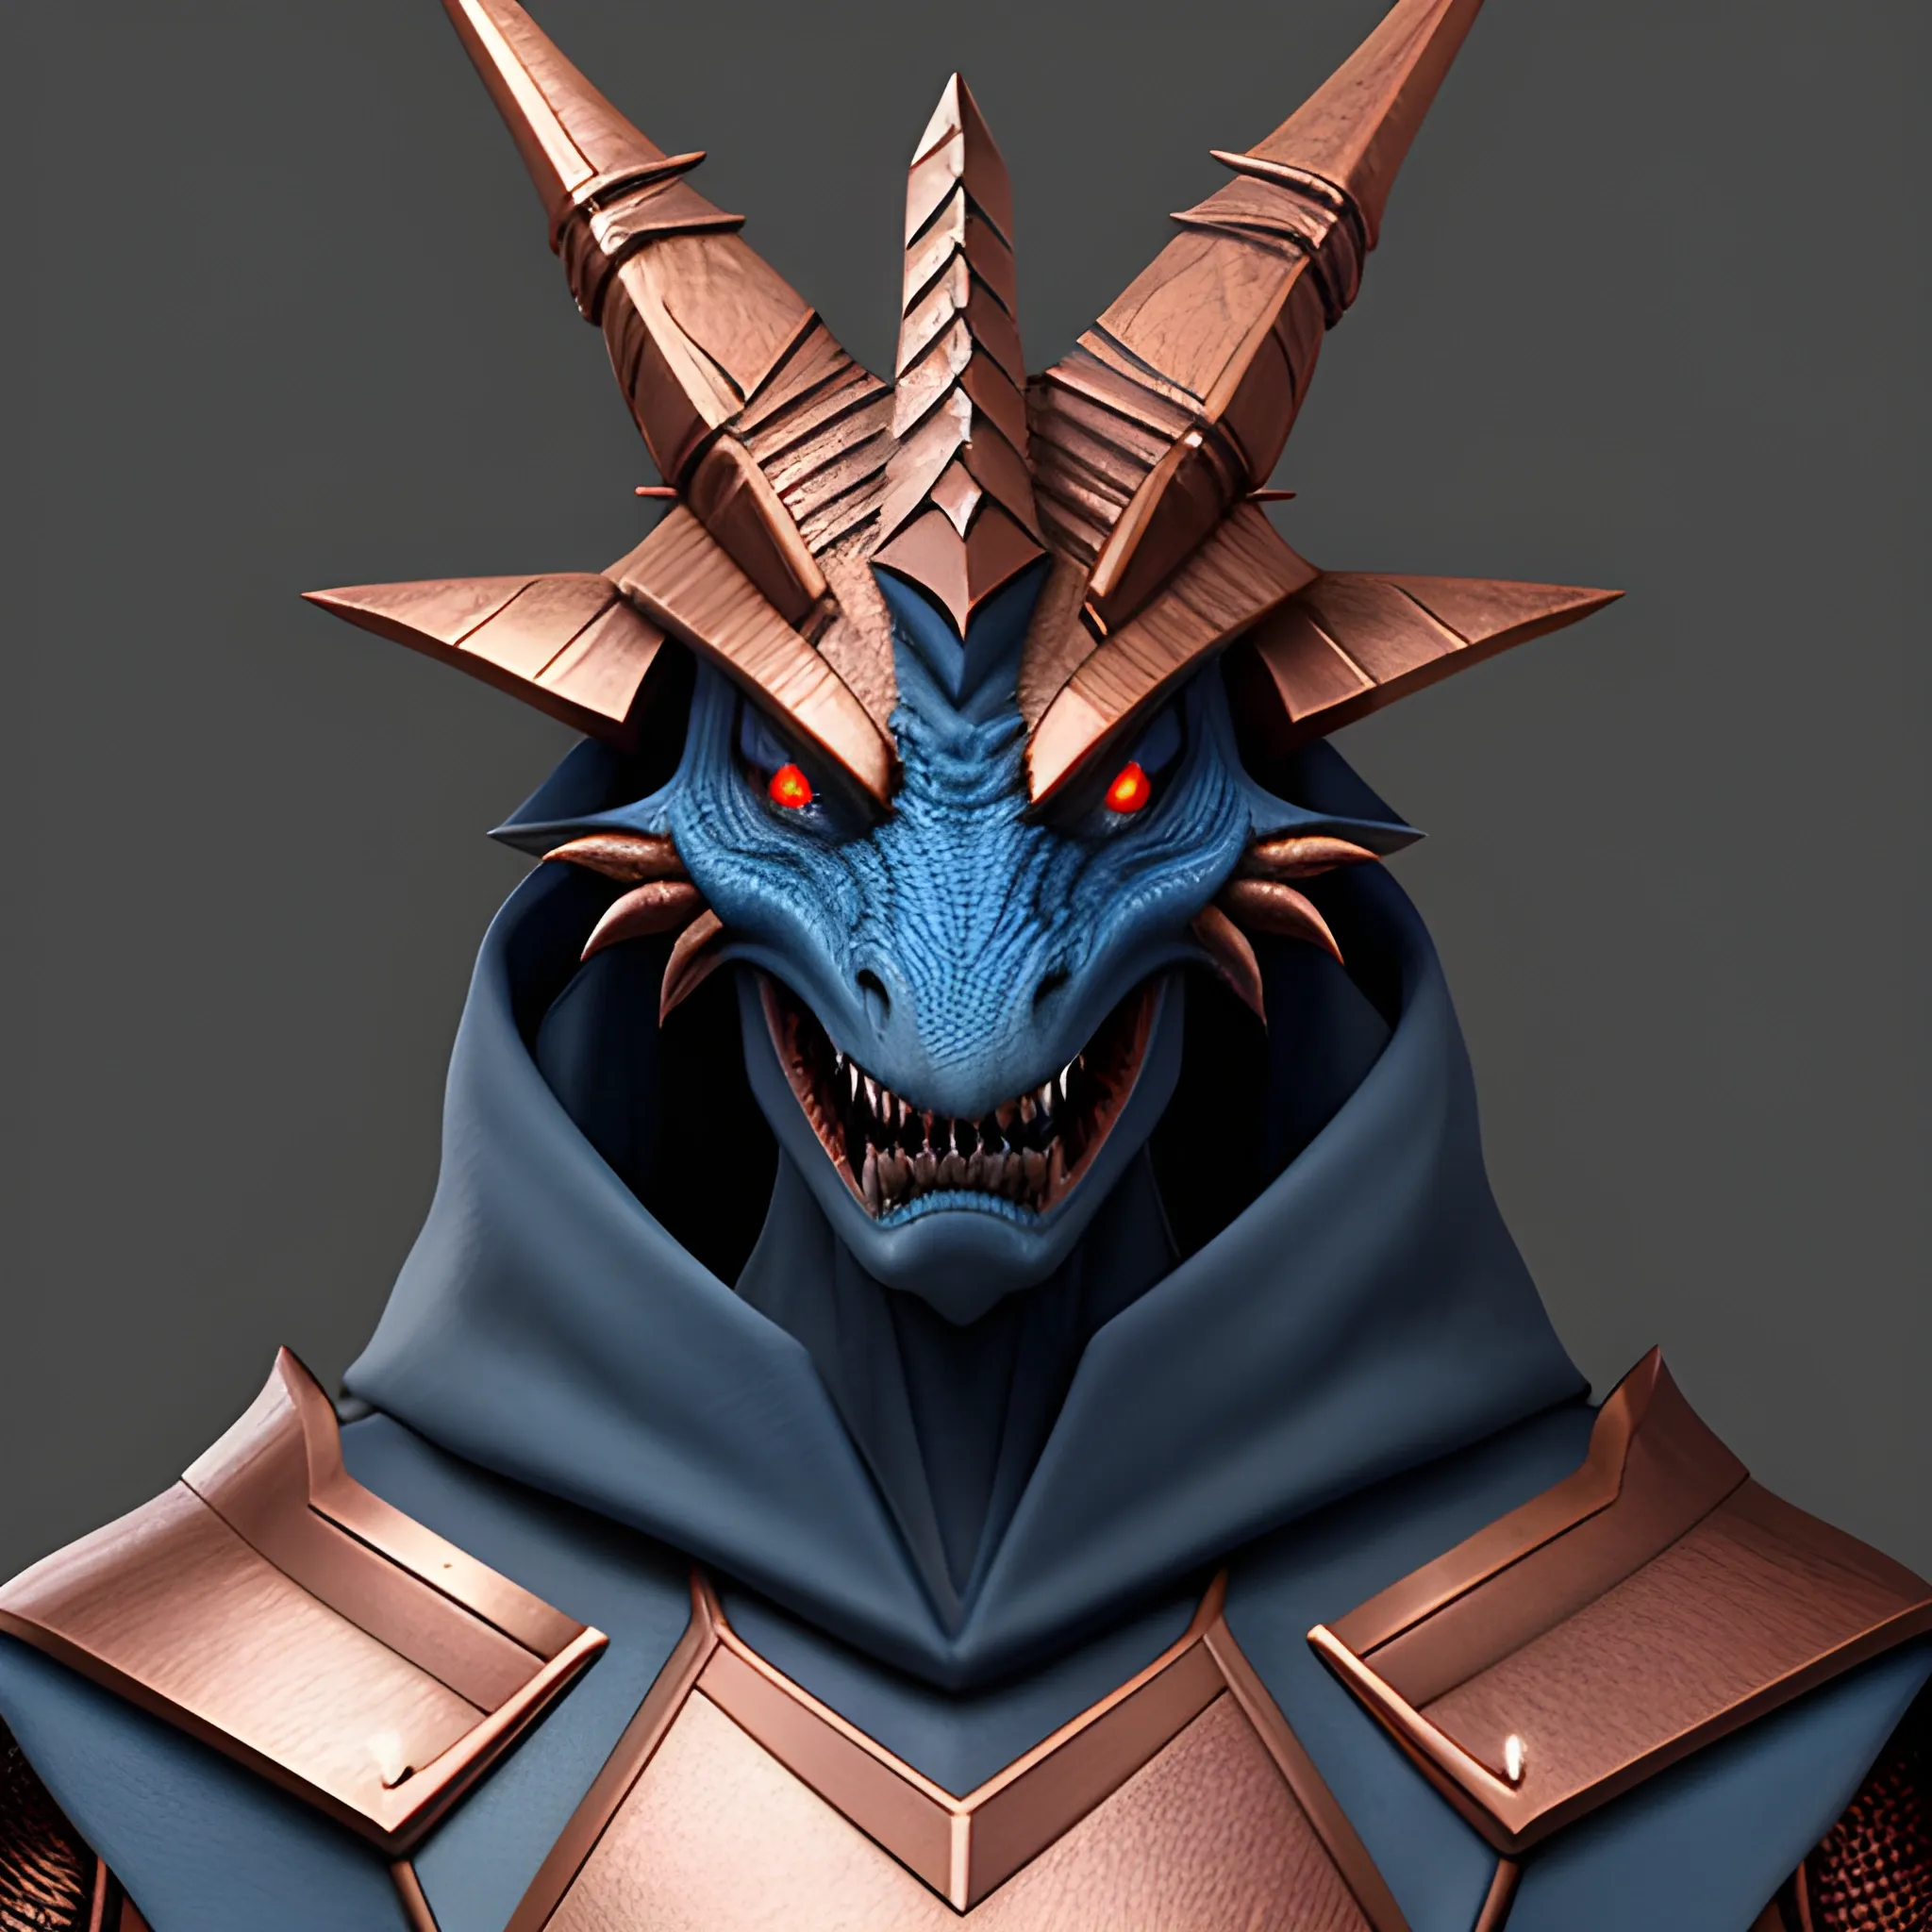 Small dragon humanoid, long snout with sharp teeth and copper scales looking at the camera. He is wearing a blue cloak with stars on it. Fantasy